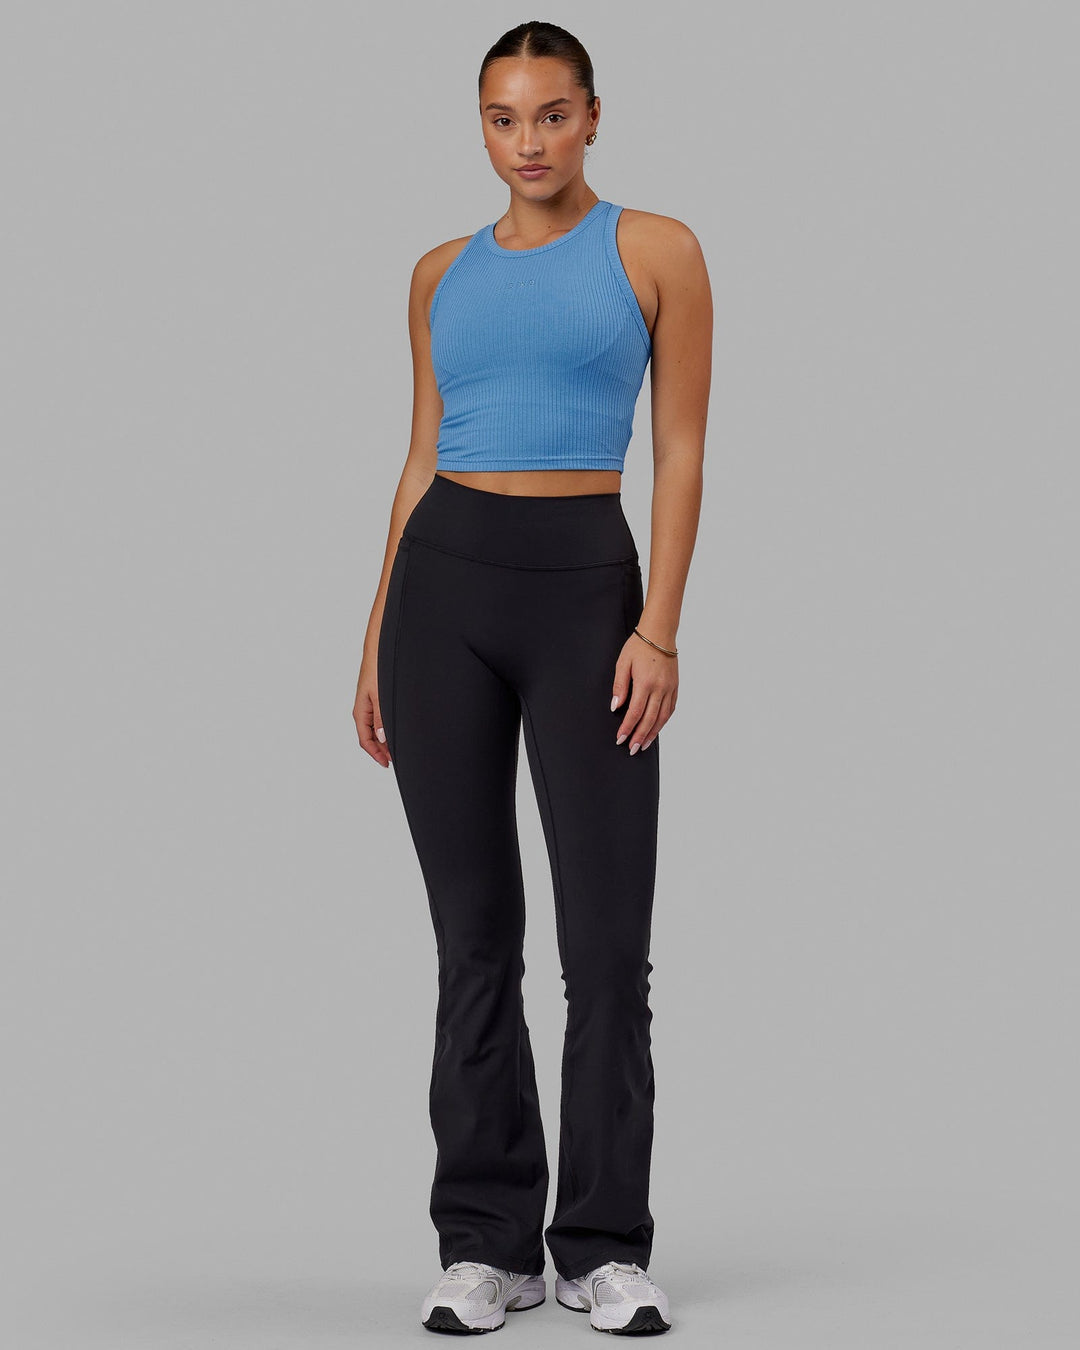 Tall Women Love These $22 'Tummy Control' Flare Leggings That 'Fit  Perfectly & Are Super Flattering